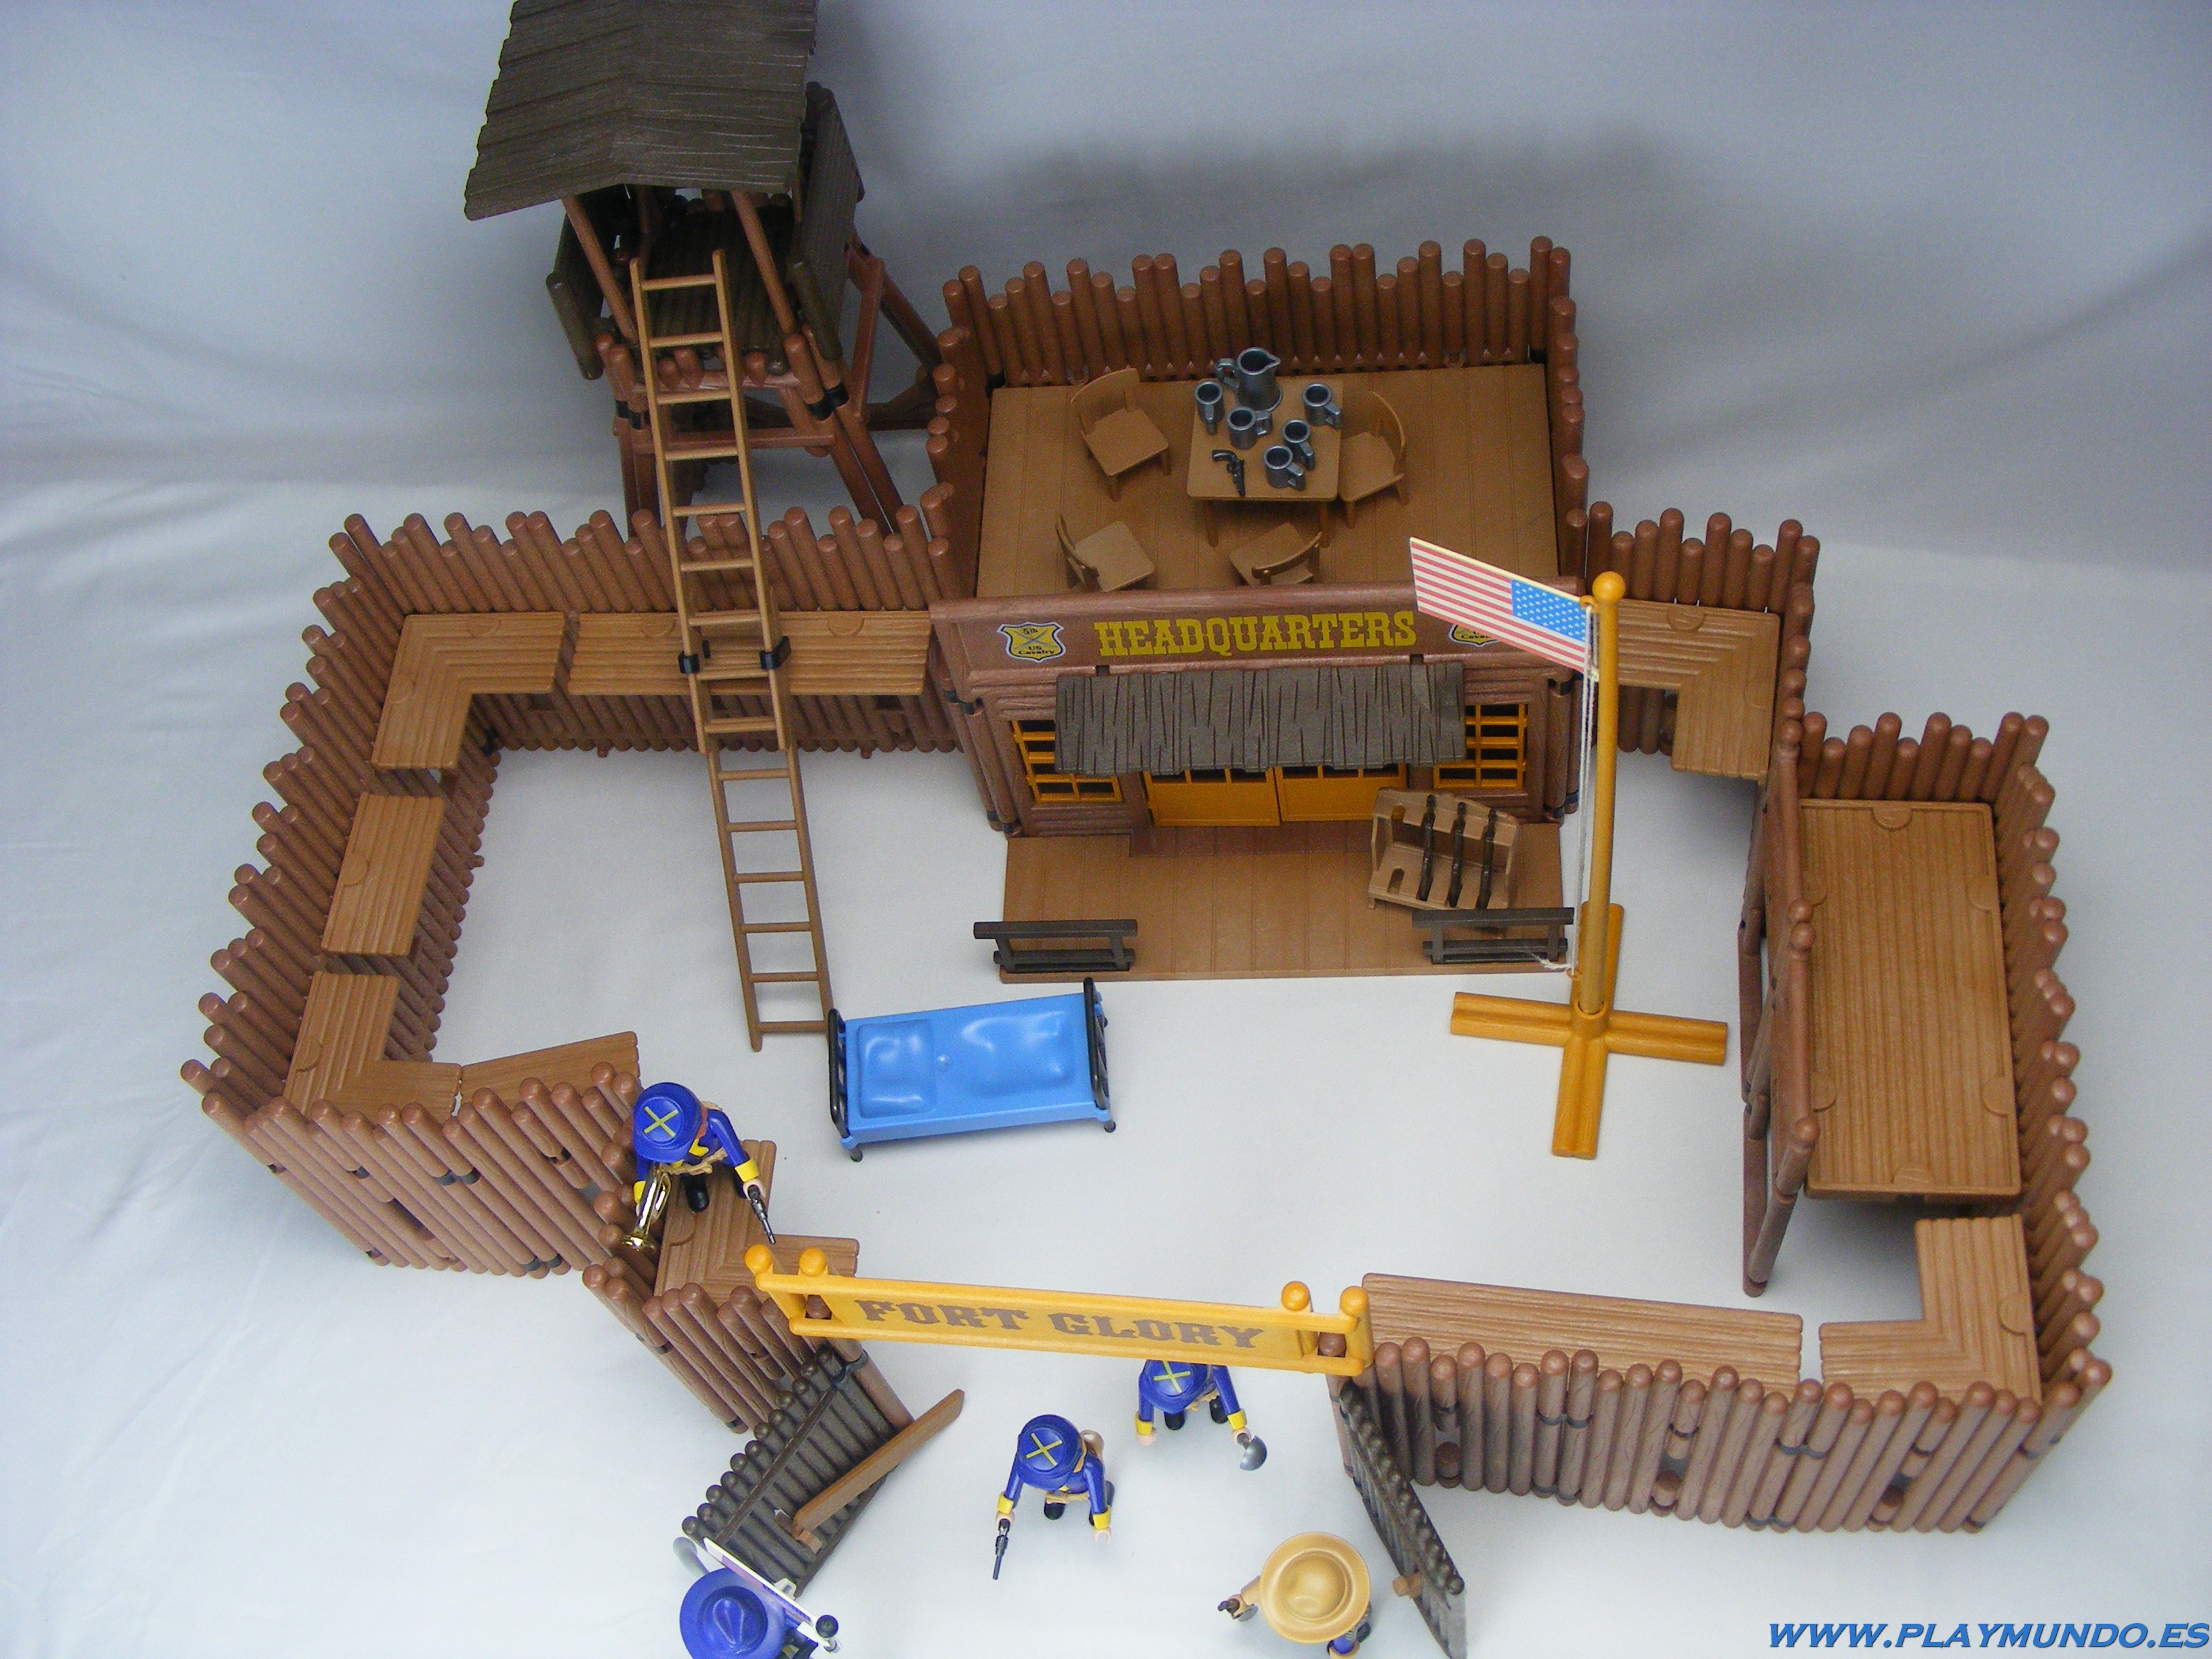 Grusom Bourgeon Afstemning PLAYMUNDO on Twitter: "PLAYMOBIL 3806 FORT GLORY FUERTE OESTE WESTERN (AÑO  1994 - 1997) https://t.co/JkIUXUYlvt https://t.co/8h5MBj1QFx" / Twitter